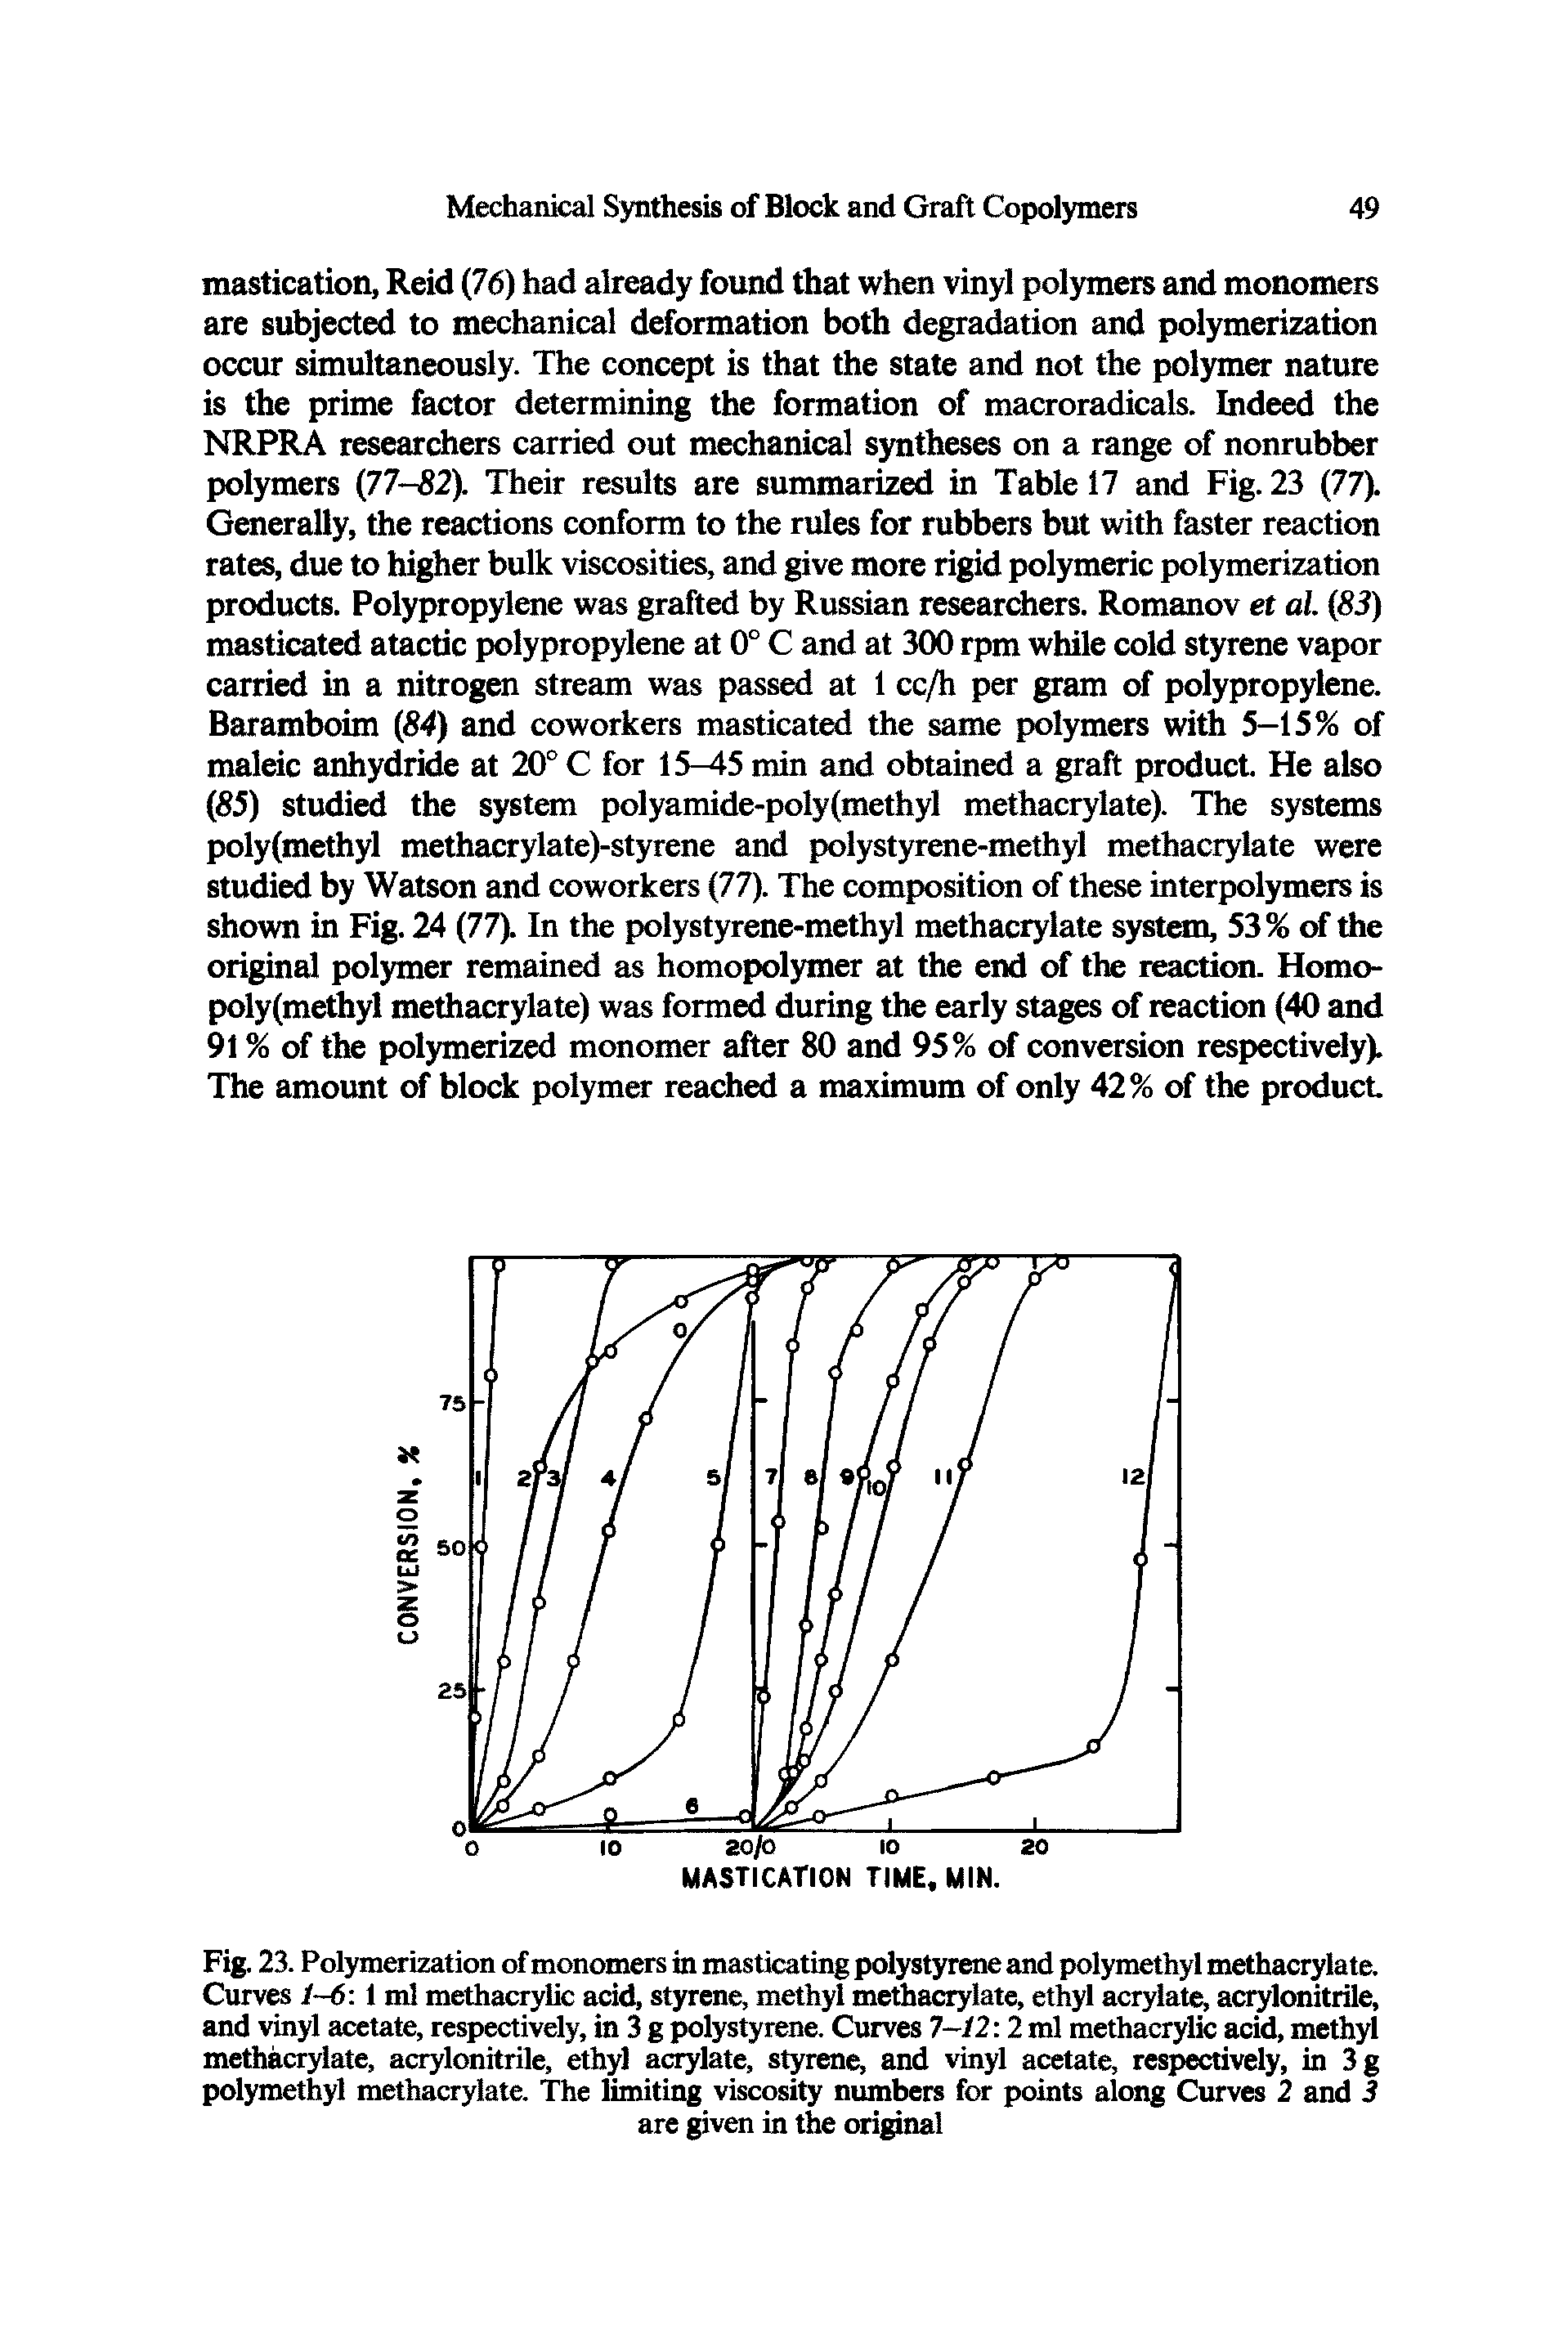 Fig. 23. Polymerization of monomers in masticating polystyrene and polymethyl methacrylate. Curves 1-6 1 ml methacrylic acid, styrene, methyl methacrylate, ethyl acrylate, acrylonitrile, and vinyl acetate, respectively, in 3 g polystyrene. Curves 7-12 2 ml methacrylic acid, methyl methacrylate, acrylonitrile, ethyl acrylate, styrene, and vinyl acetate, respectively, in 3g polymethyl methacrylate. The limiting viscosity numbers for points along Curves 2 and 3...